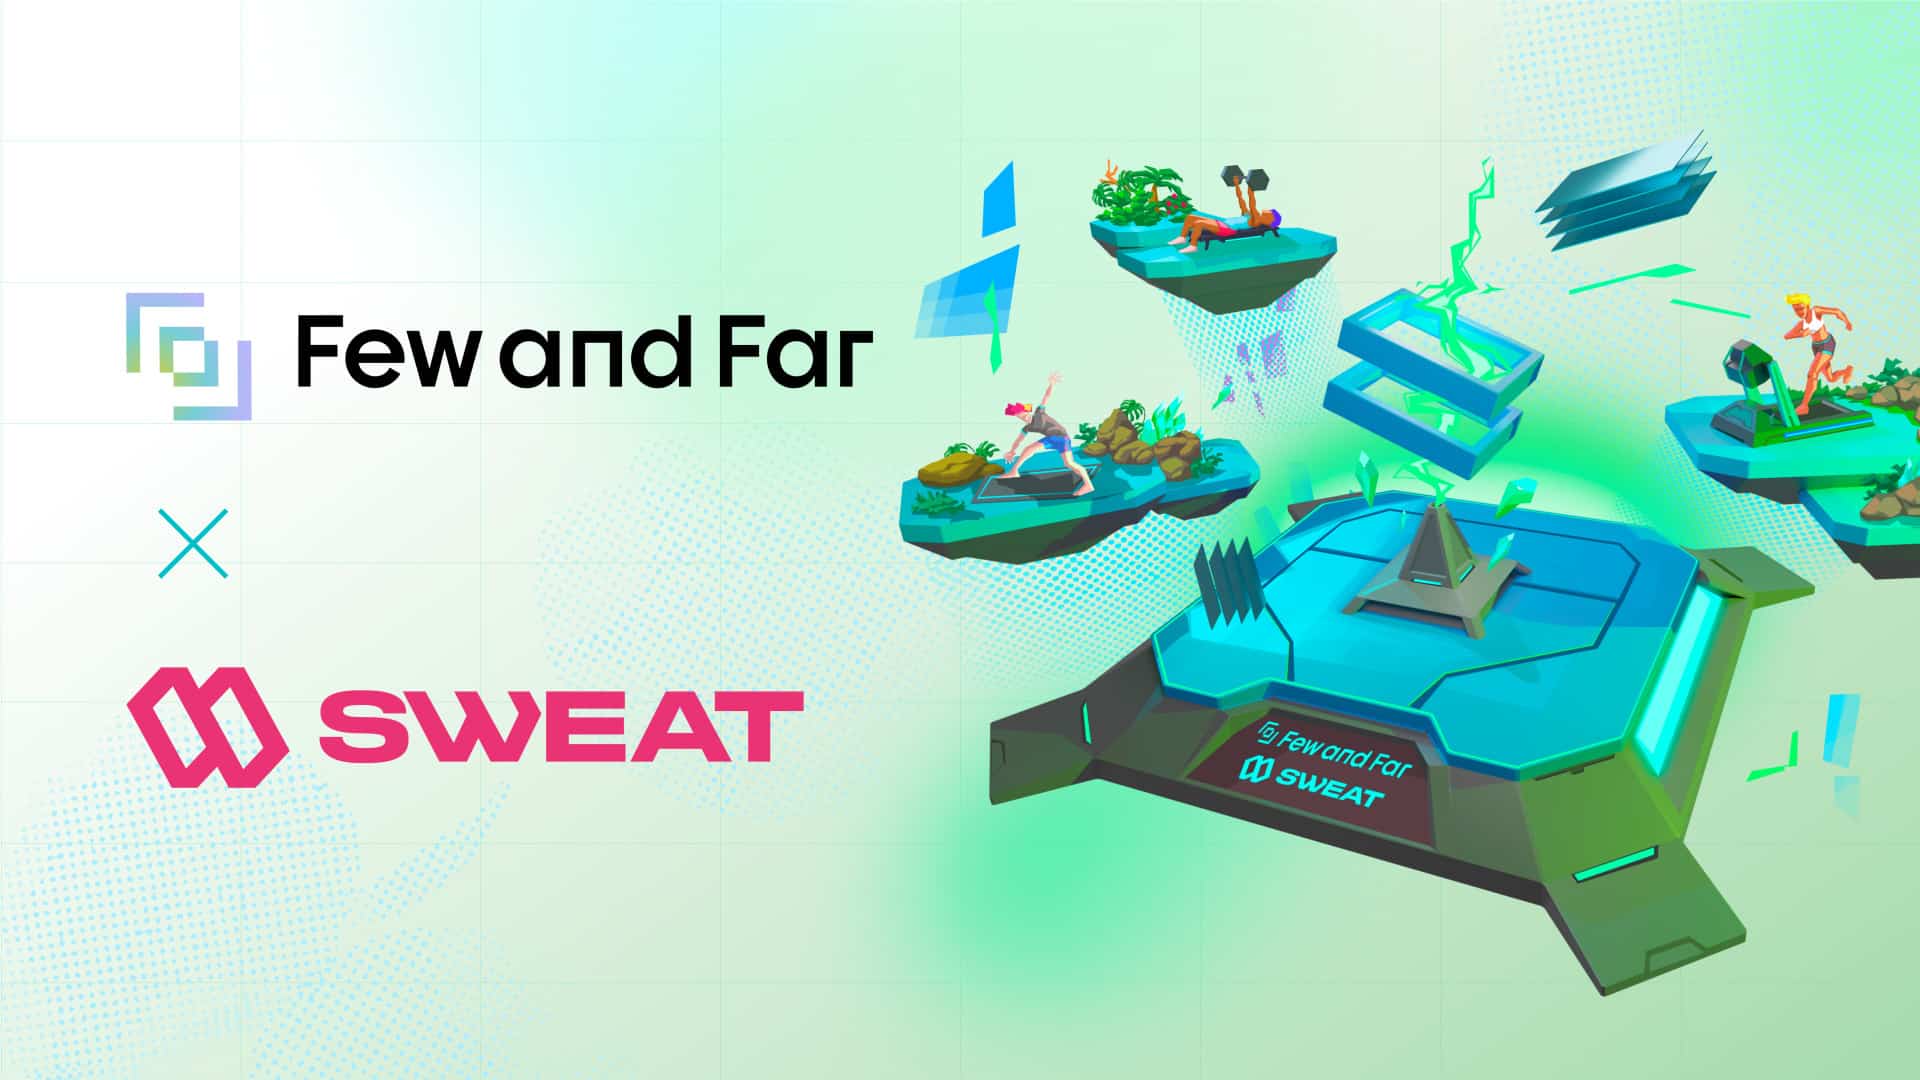 Non-Fungible Token (NFT) Collection - Sweat Economy Stretches into NFTs Through Few and Far Partnership